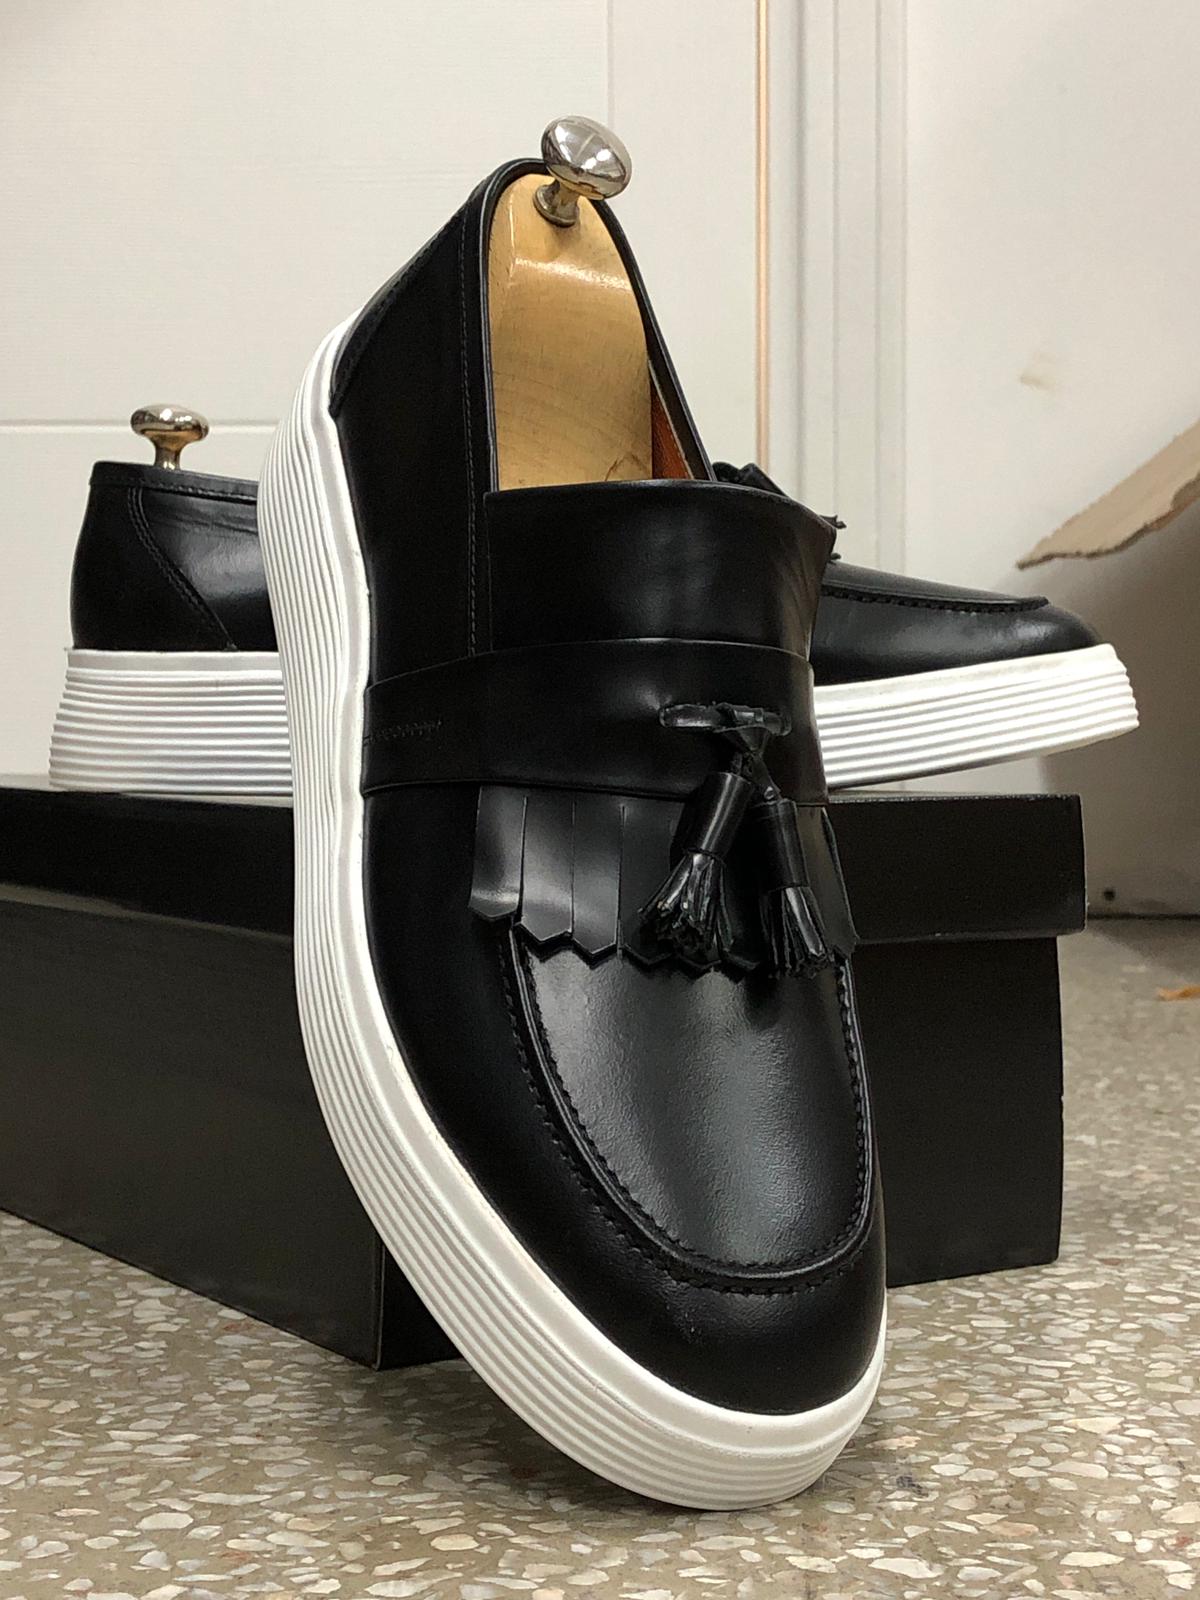 Calf-Leather Shoes in Black (Limited Edition)